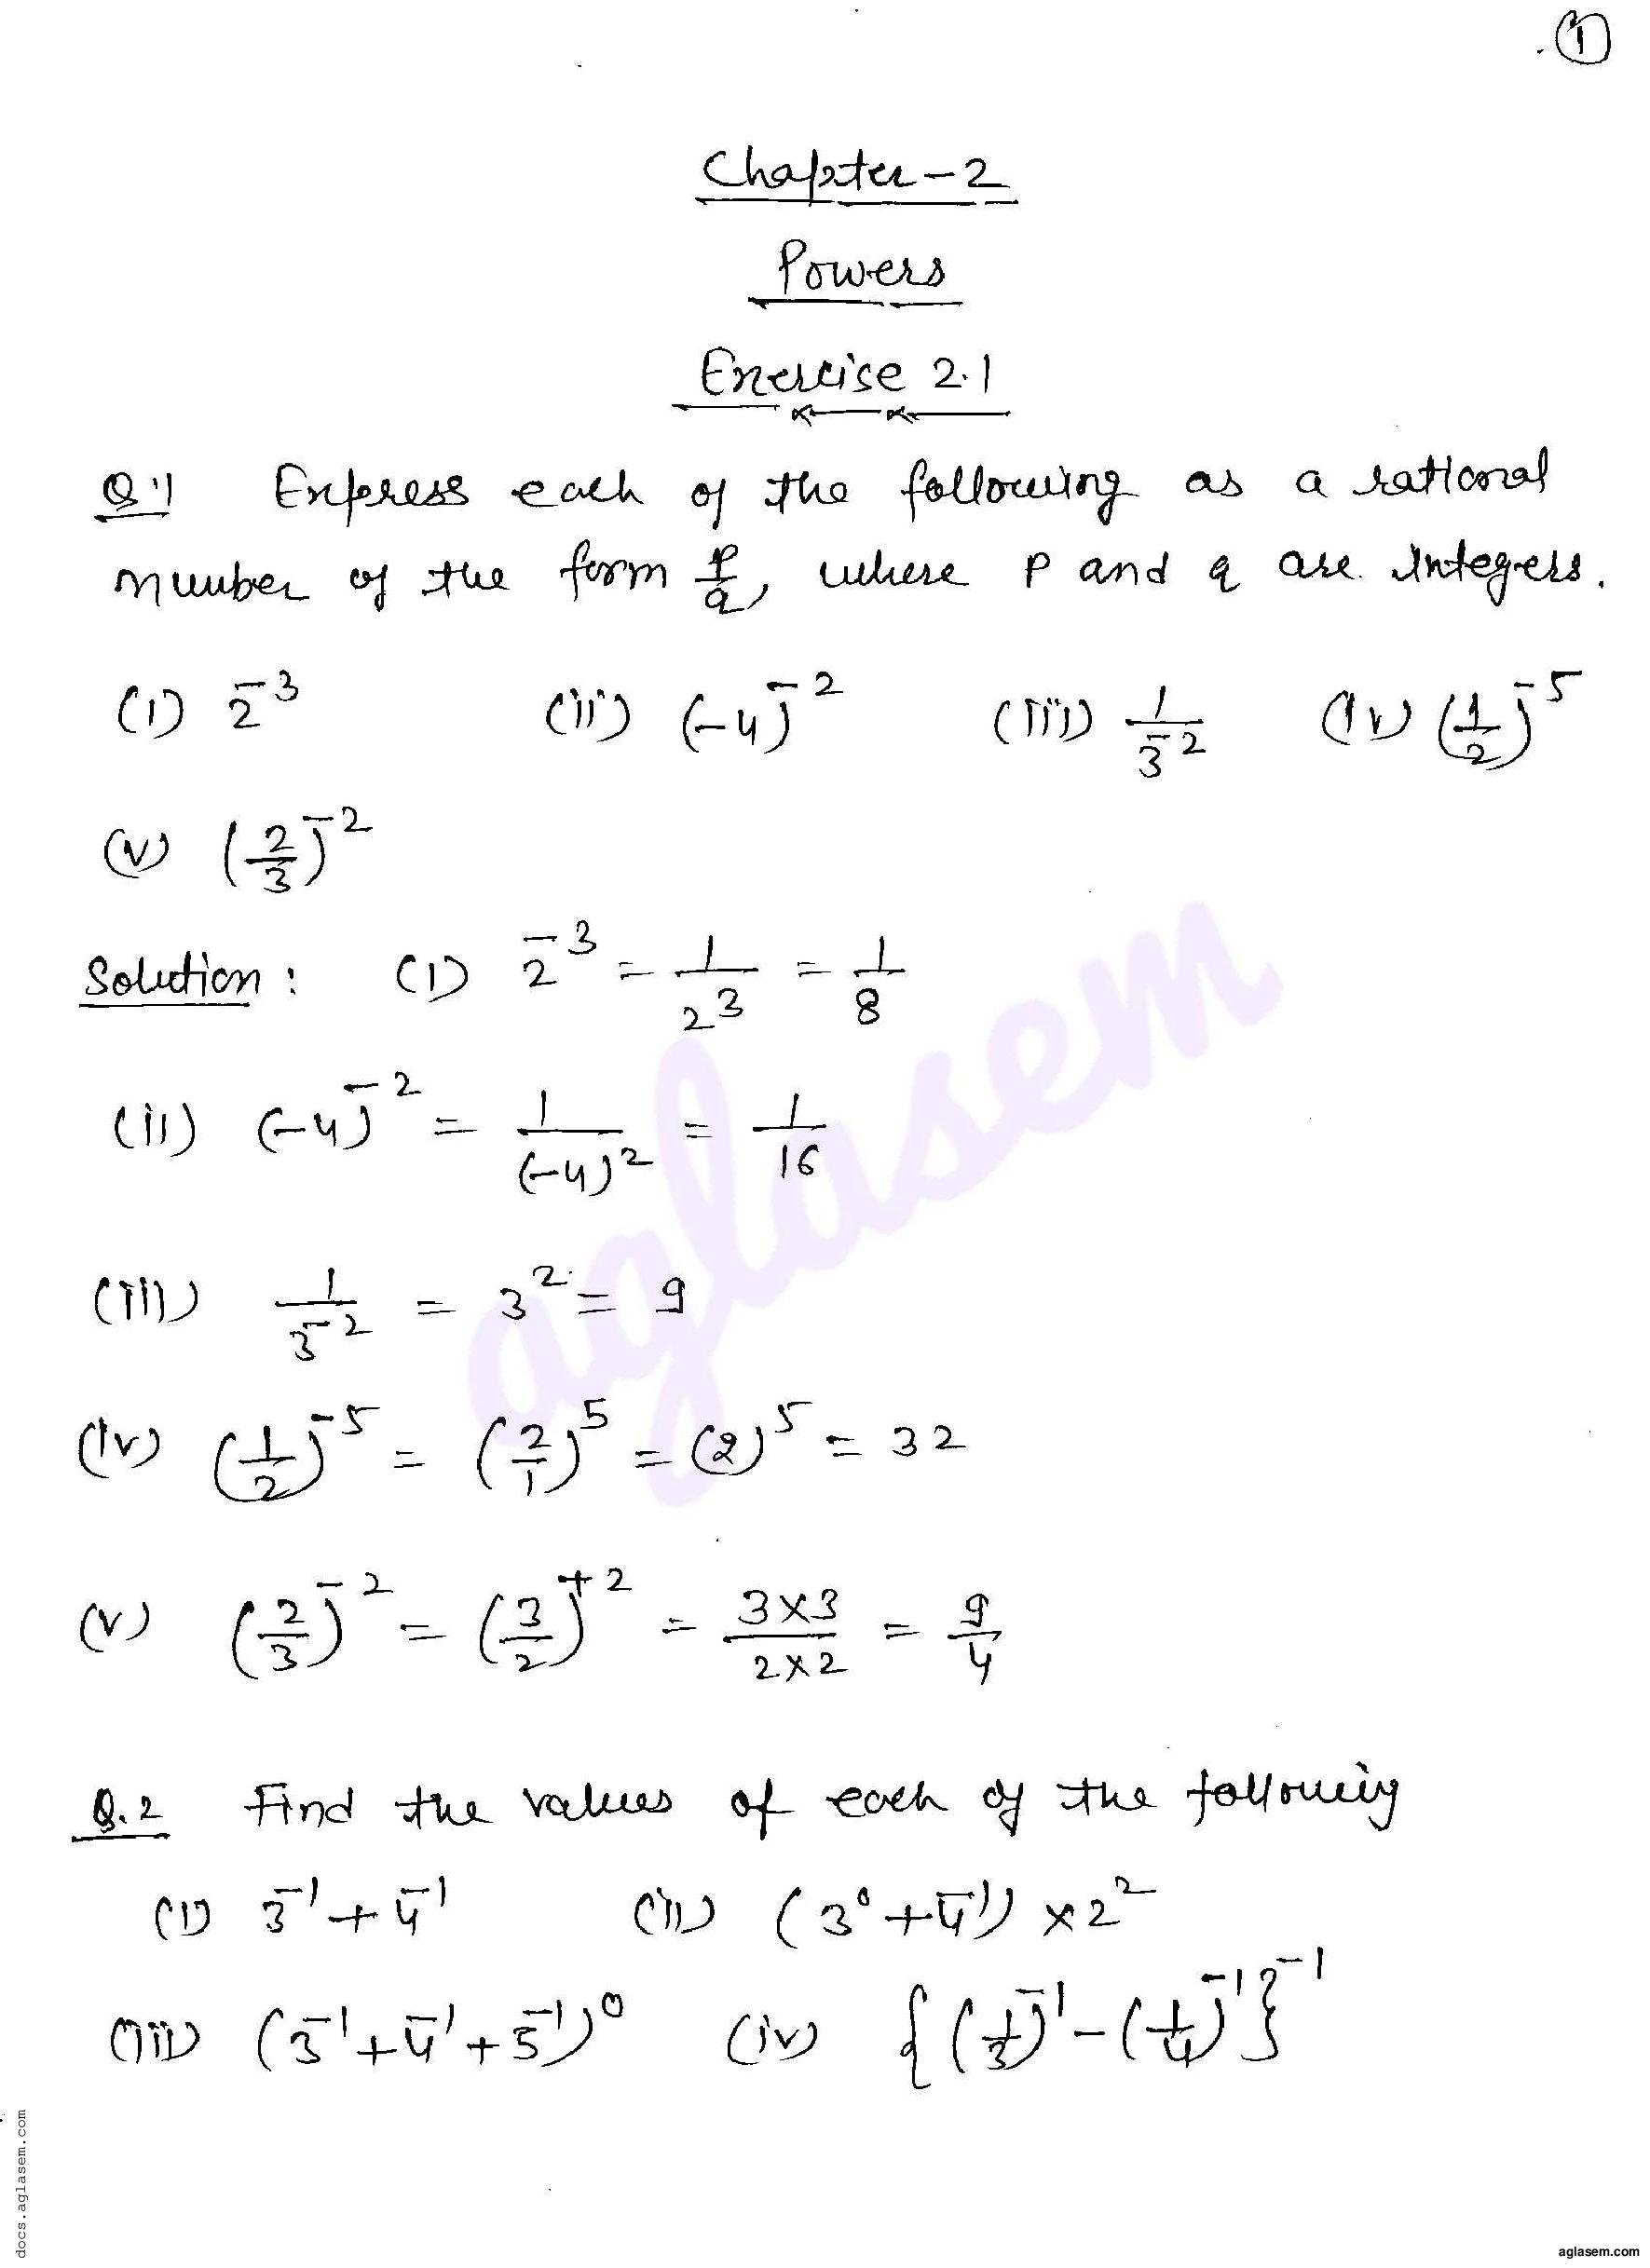 RD Sharma Solutions Class 8 Chapter 2 Powers Exercise 2.1 - Page 1